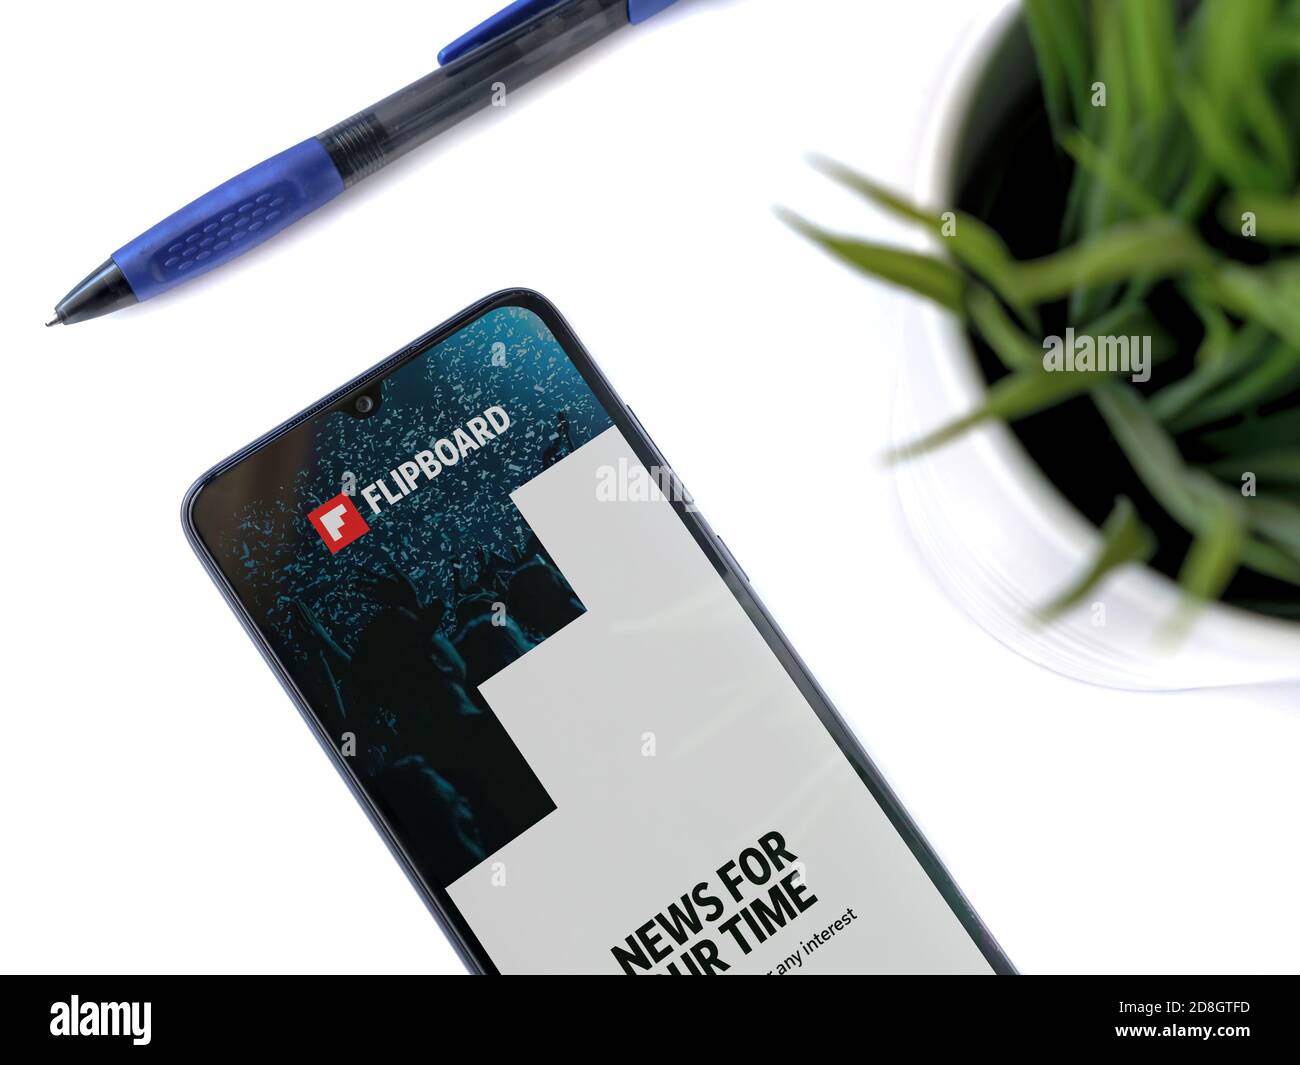 Lod, Israel - July 8, 2020: Modern minimalist office workspace with black mobile smartphone with Flipboard app launch screen with logo on white backgr Stock Photo